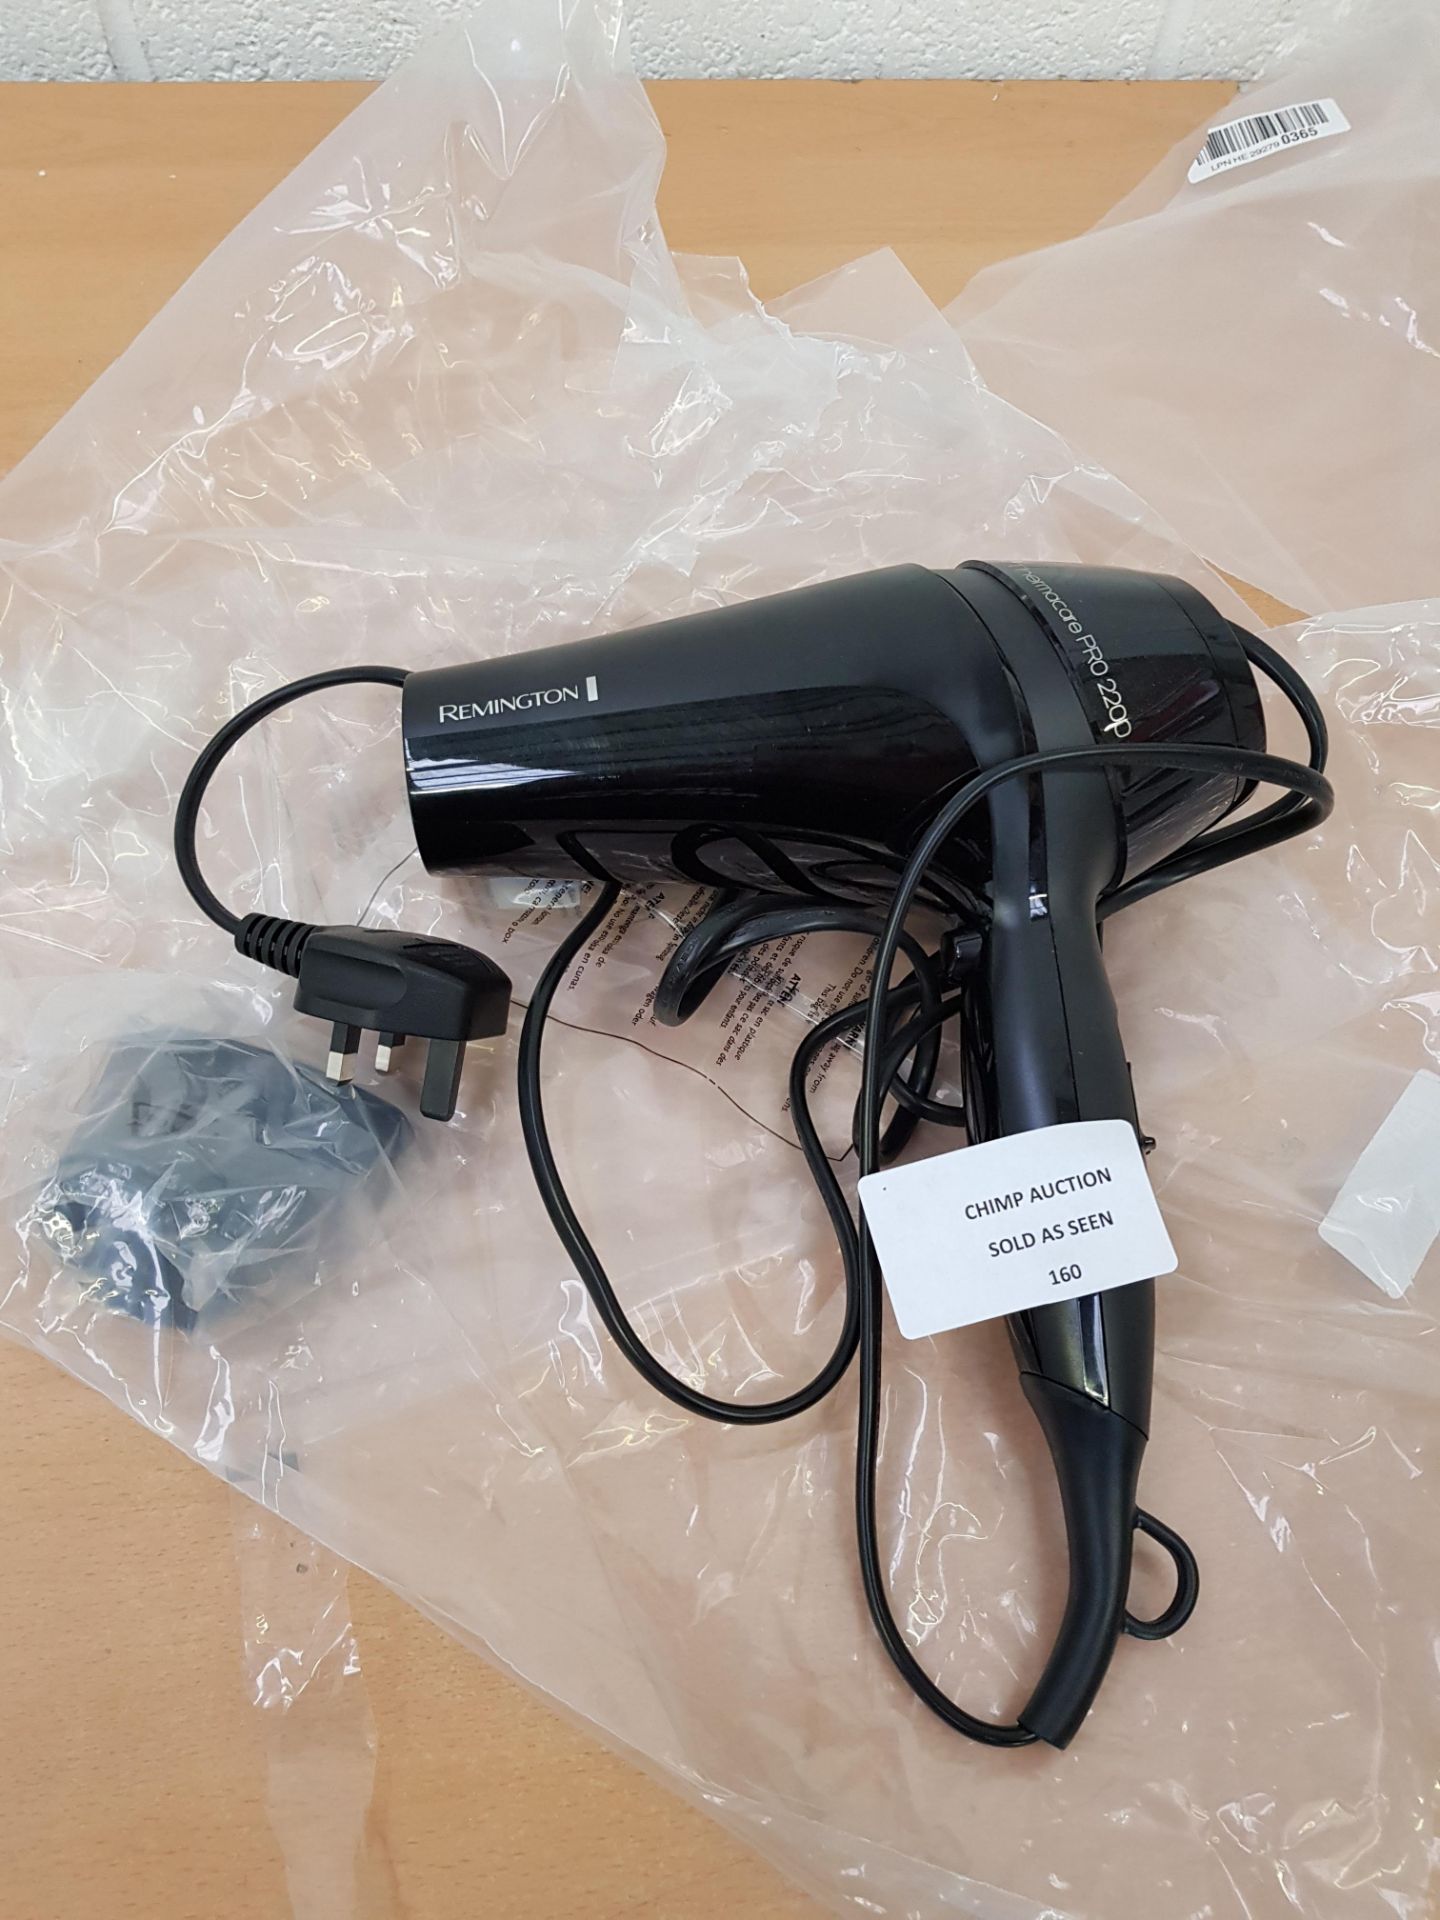 Remington Thermacare Pro 2200 hair dryer